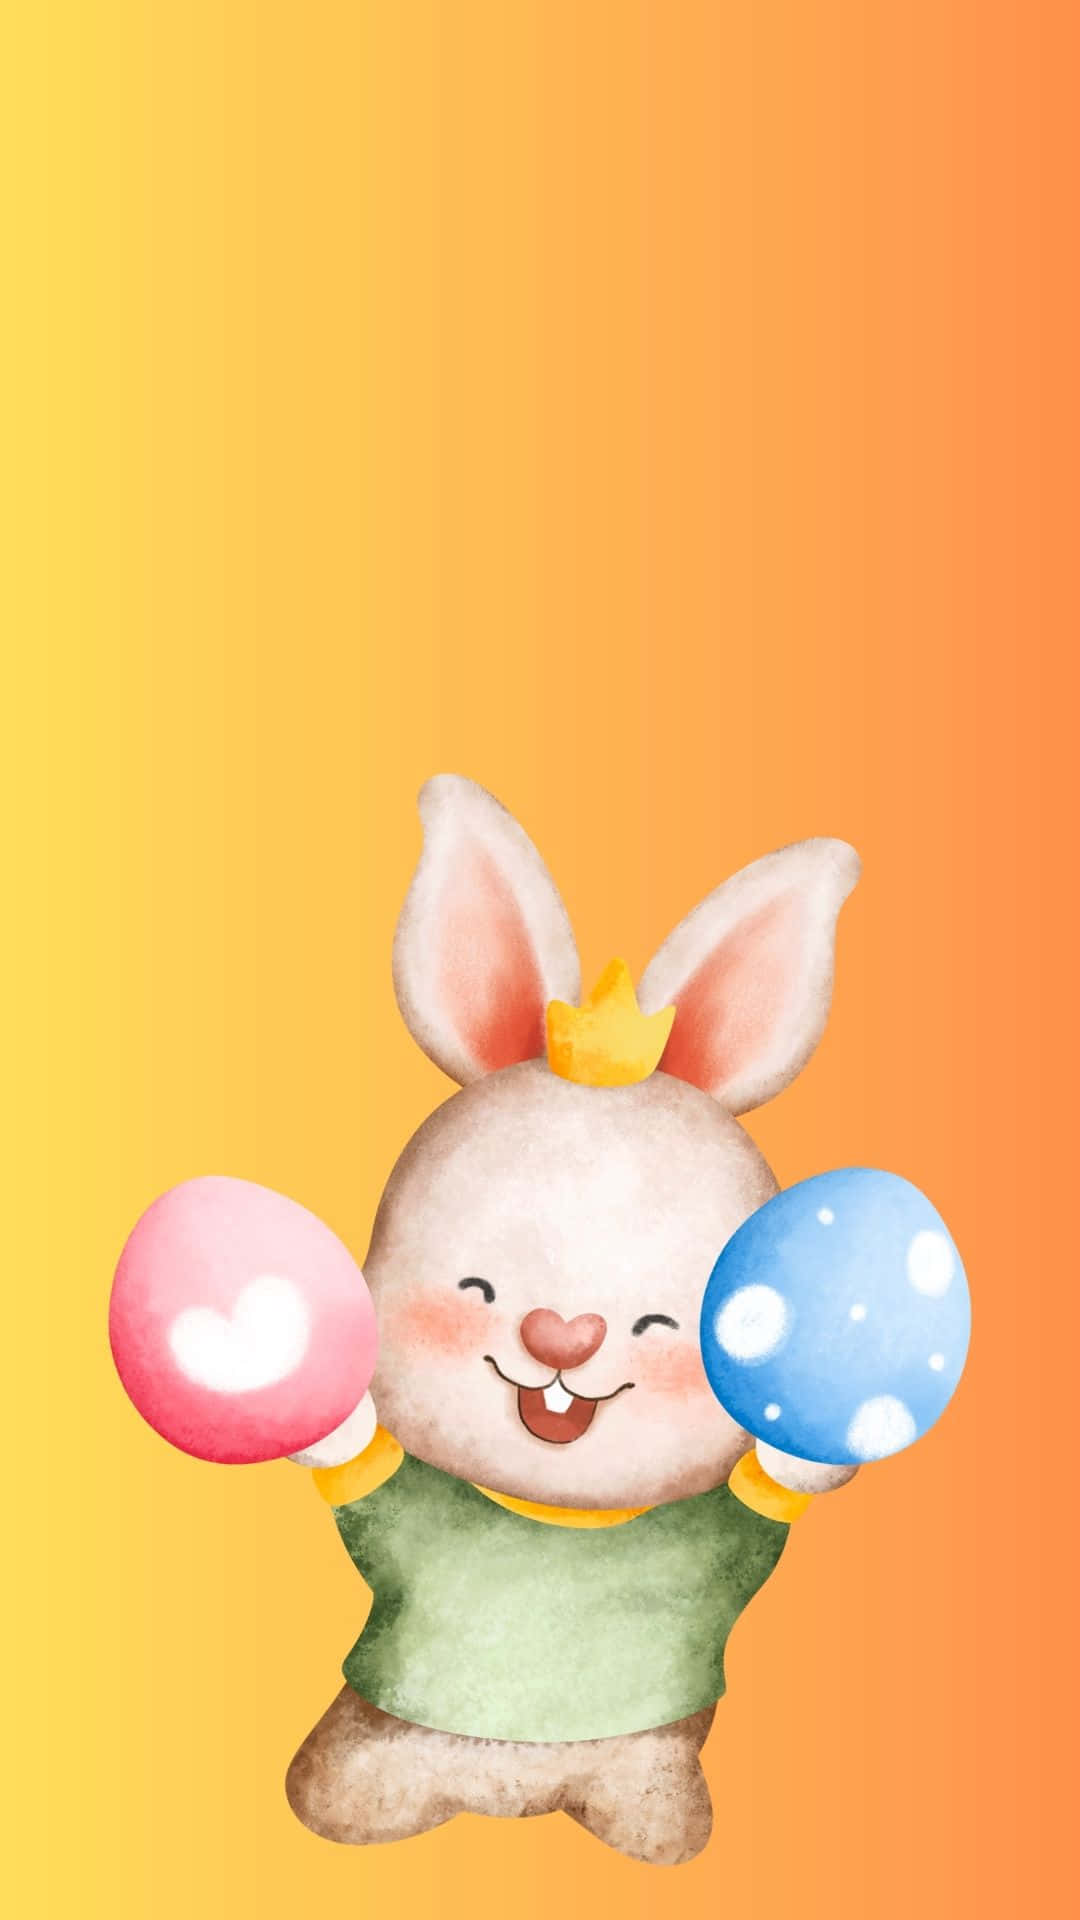 Celebrating Easter with the Easter Bunny Wallpaper